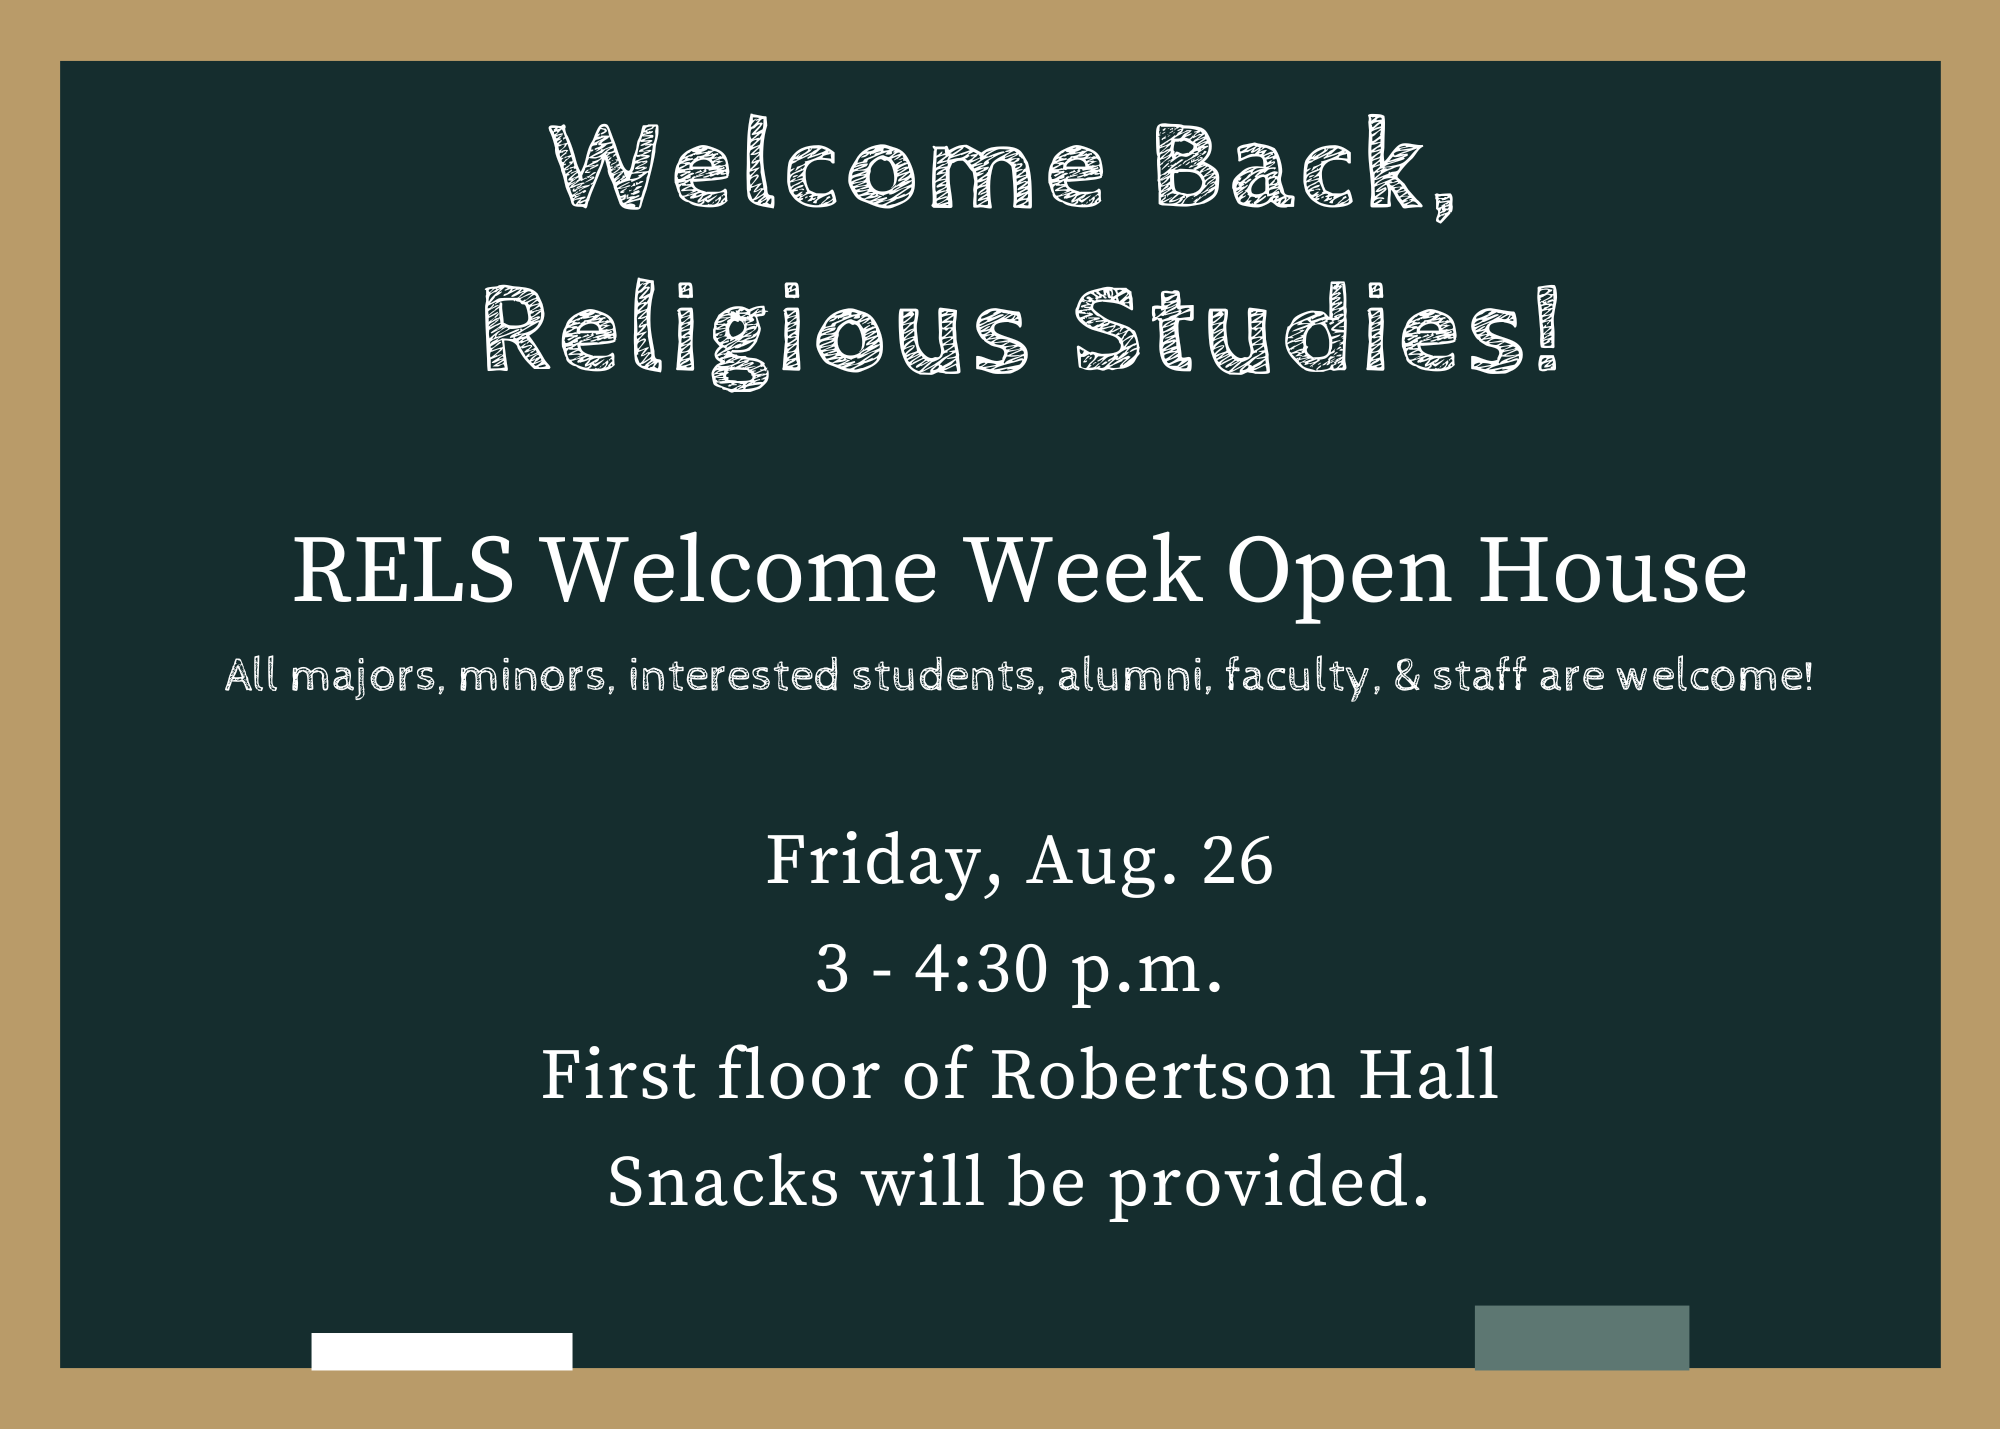 Welcome Back, Religious Studies!  Welcome Week Open House; All interested students, alumni, faculty, & staff are welcome!  Friday, Aug. 26, 3 - 4:30 p.m.; First floor of Reobertson Hall; Snacks will be provided.